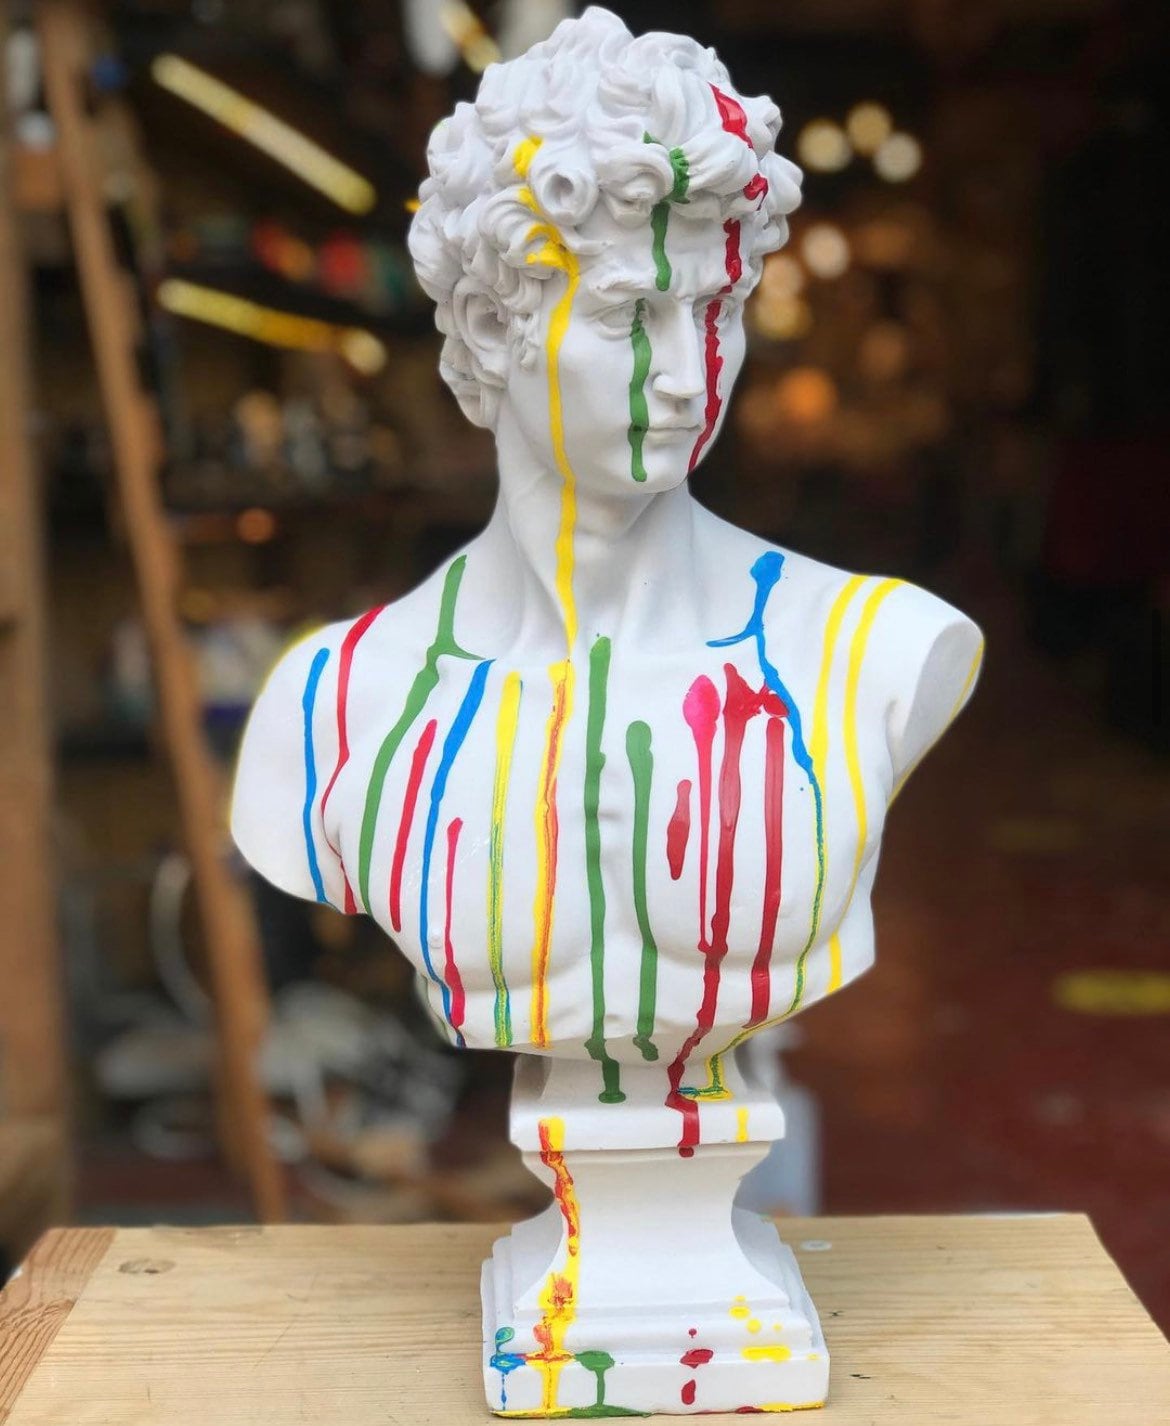 Contemporary Elegance: Large David Bust Sculpture with Colorful Accents